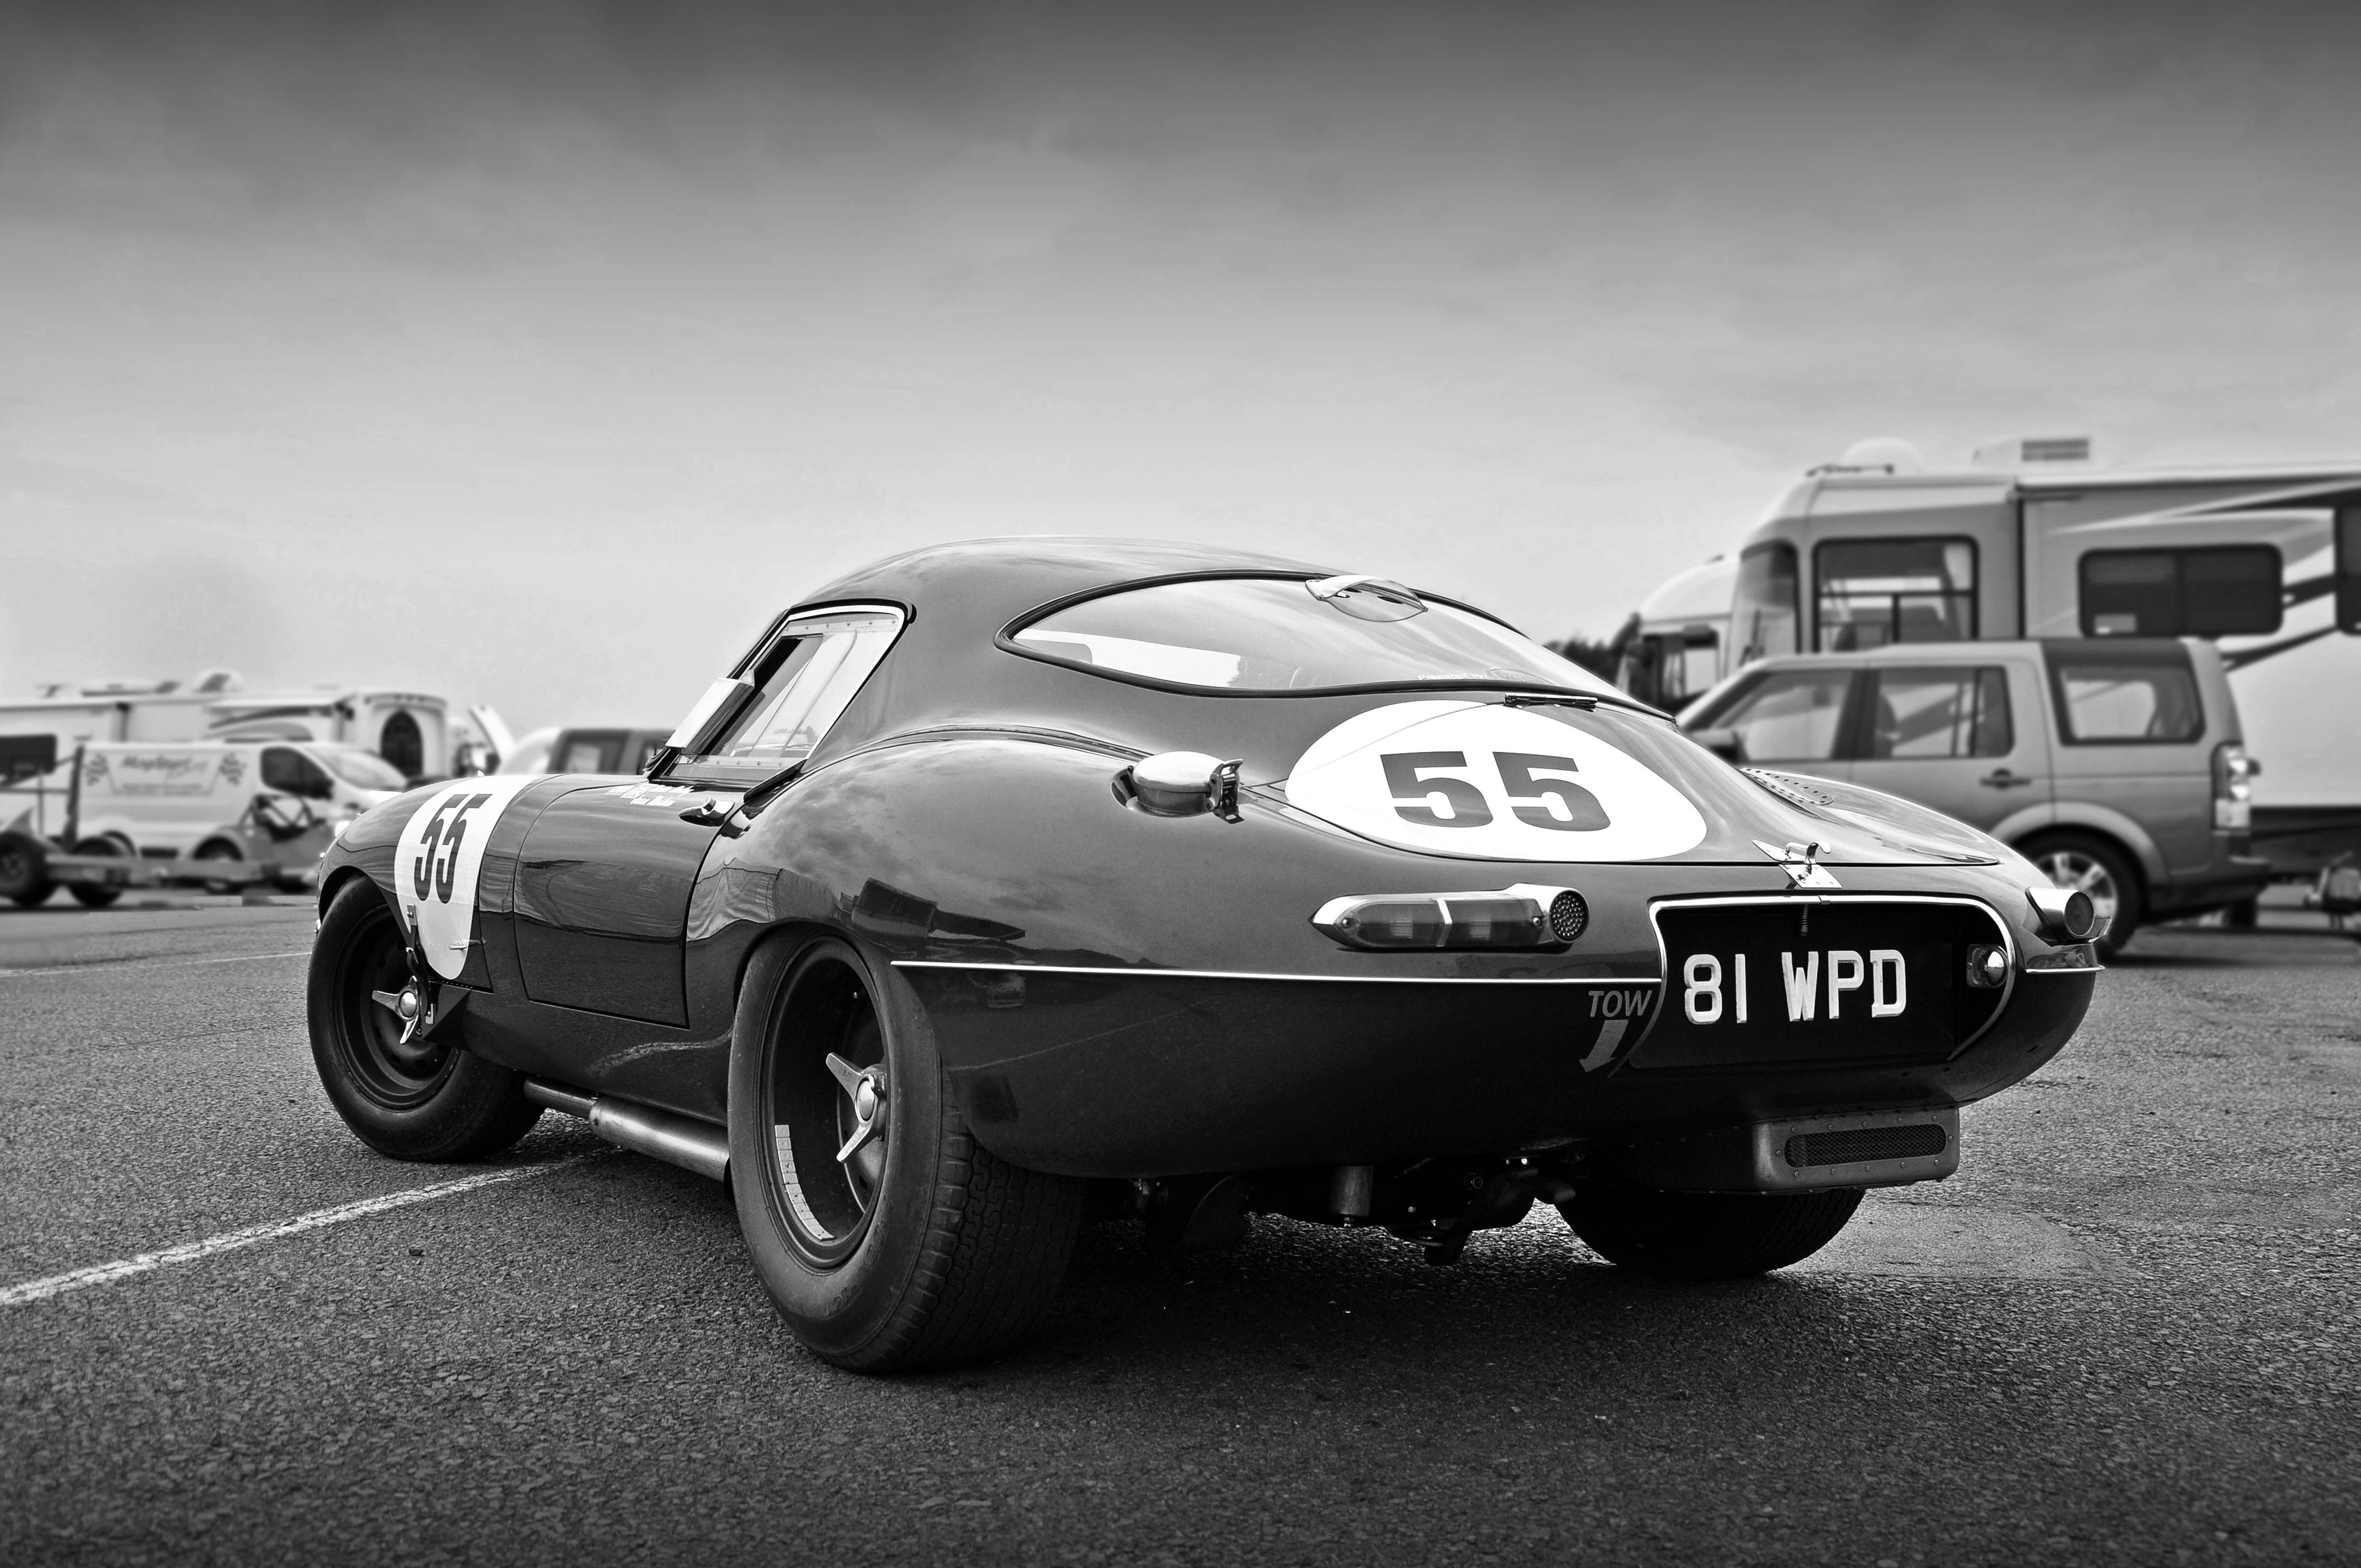 Jaguar Series 1 E Type Image. Picture And Videos